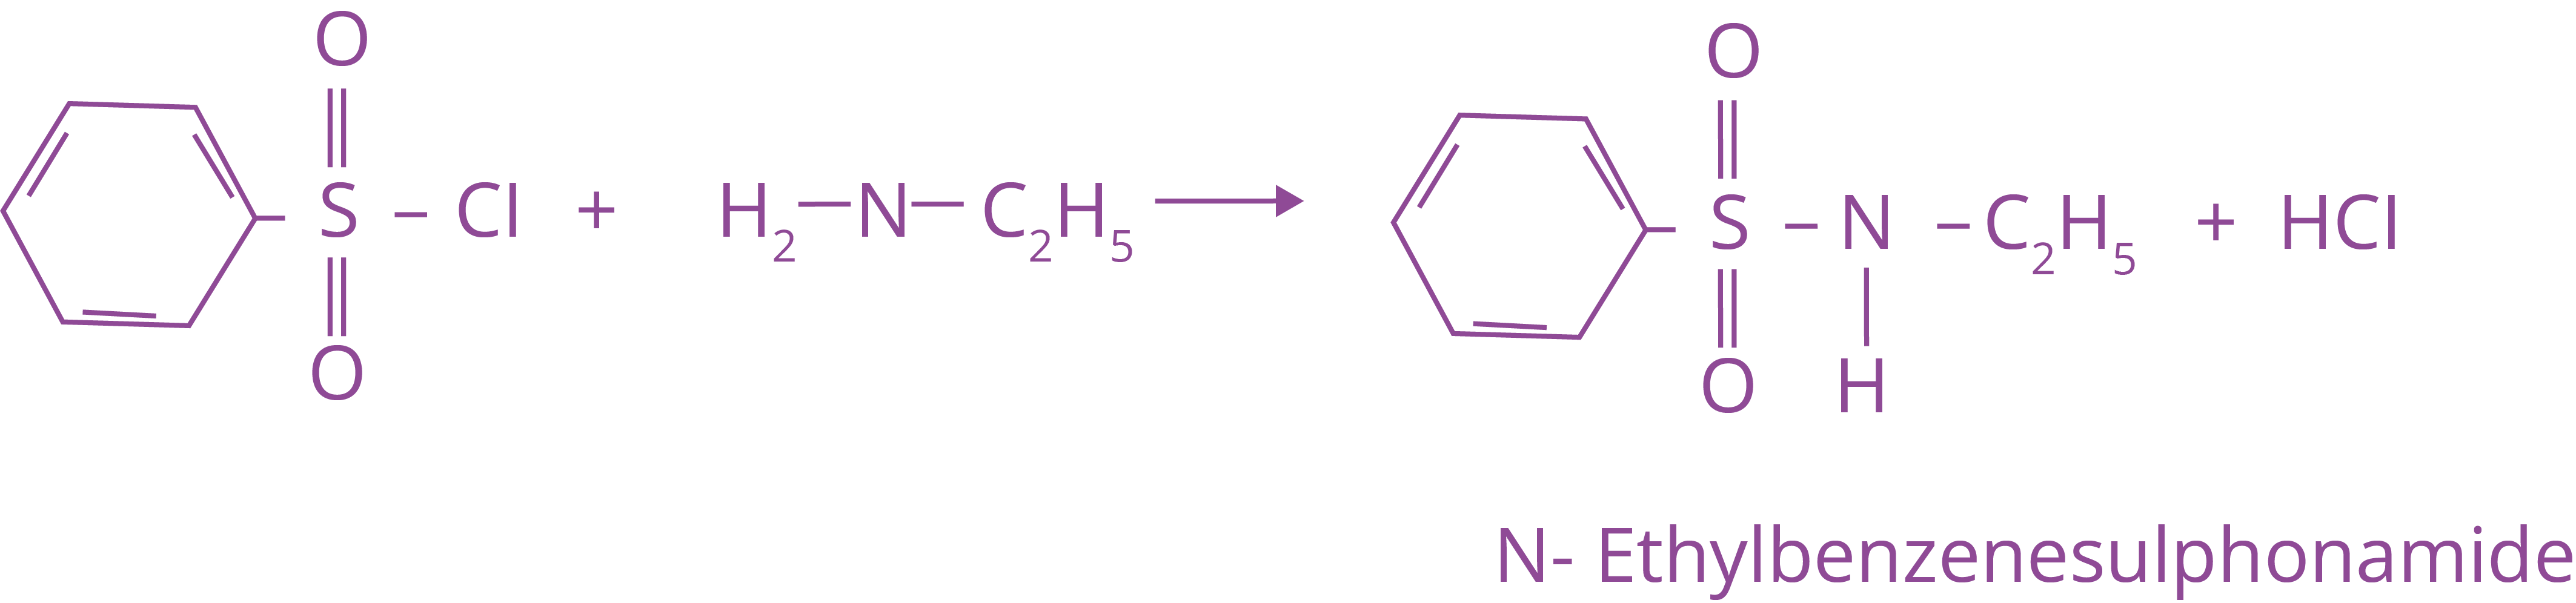 Only primary amines react with hinsberg reagents and forms precipitate that dissolve in addition to alkali.